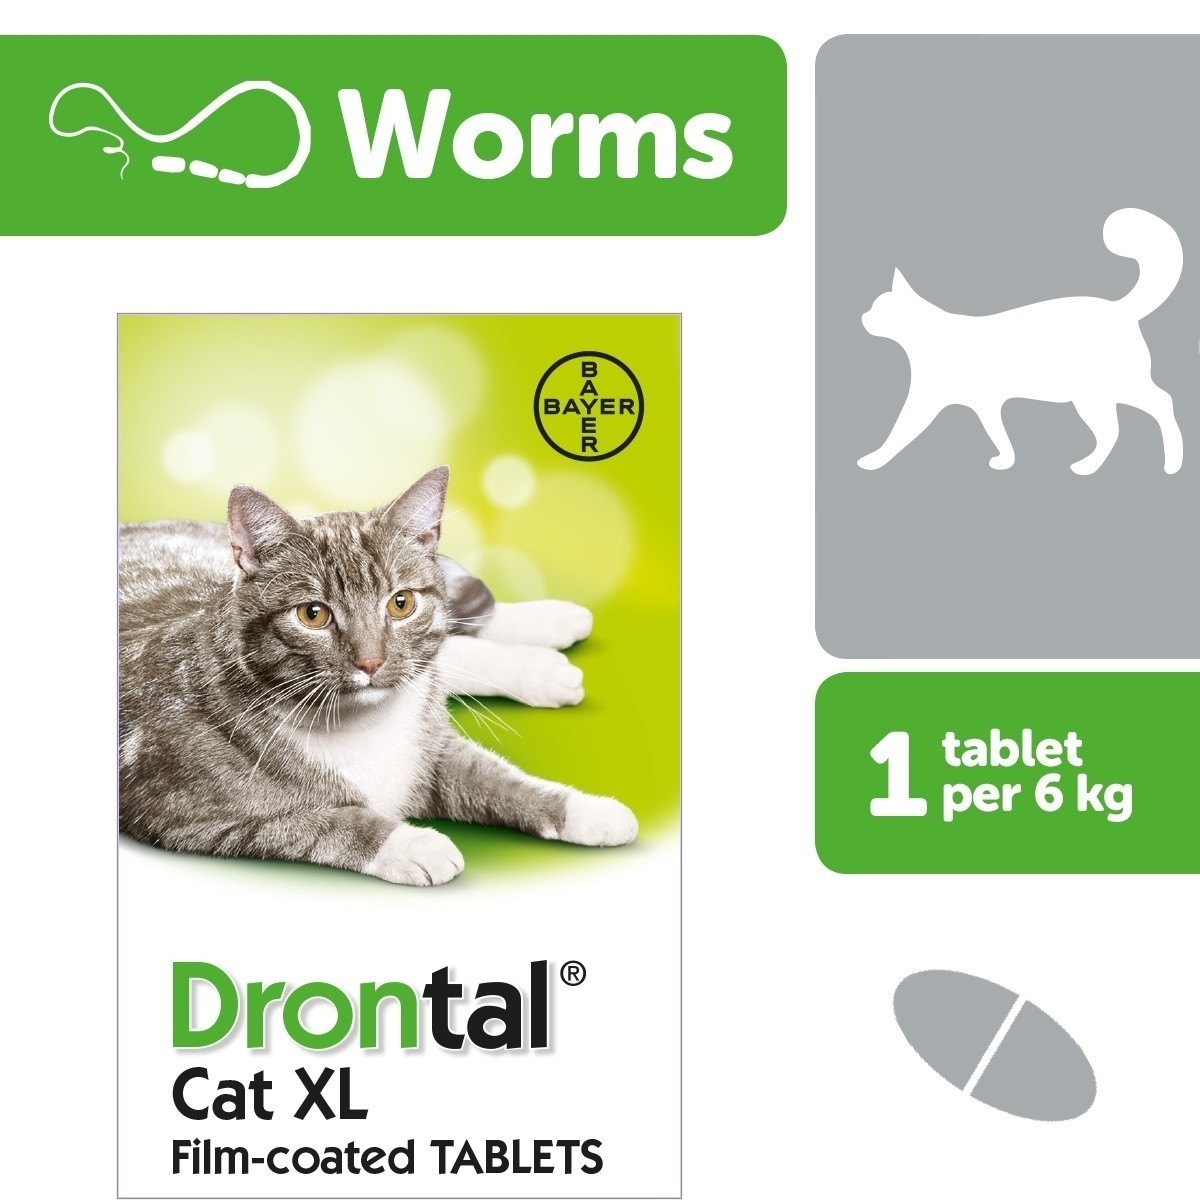 Drontal Cat XL Worming Tablets - From £2.12